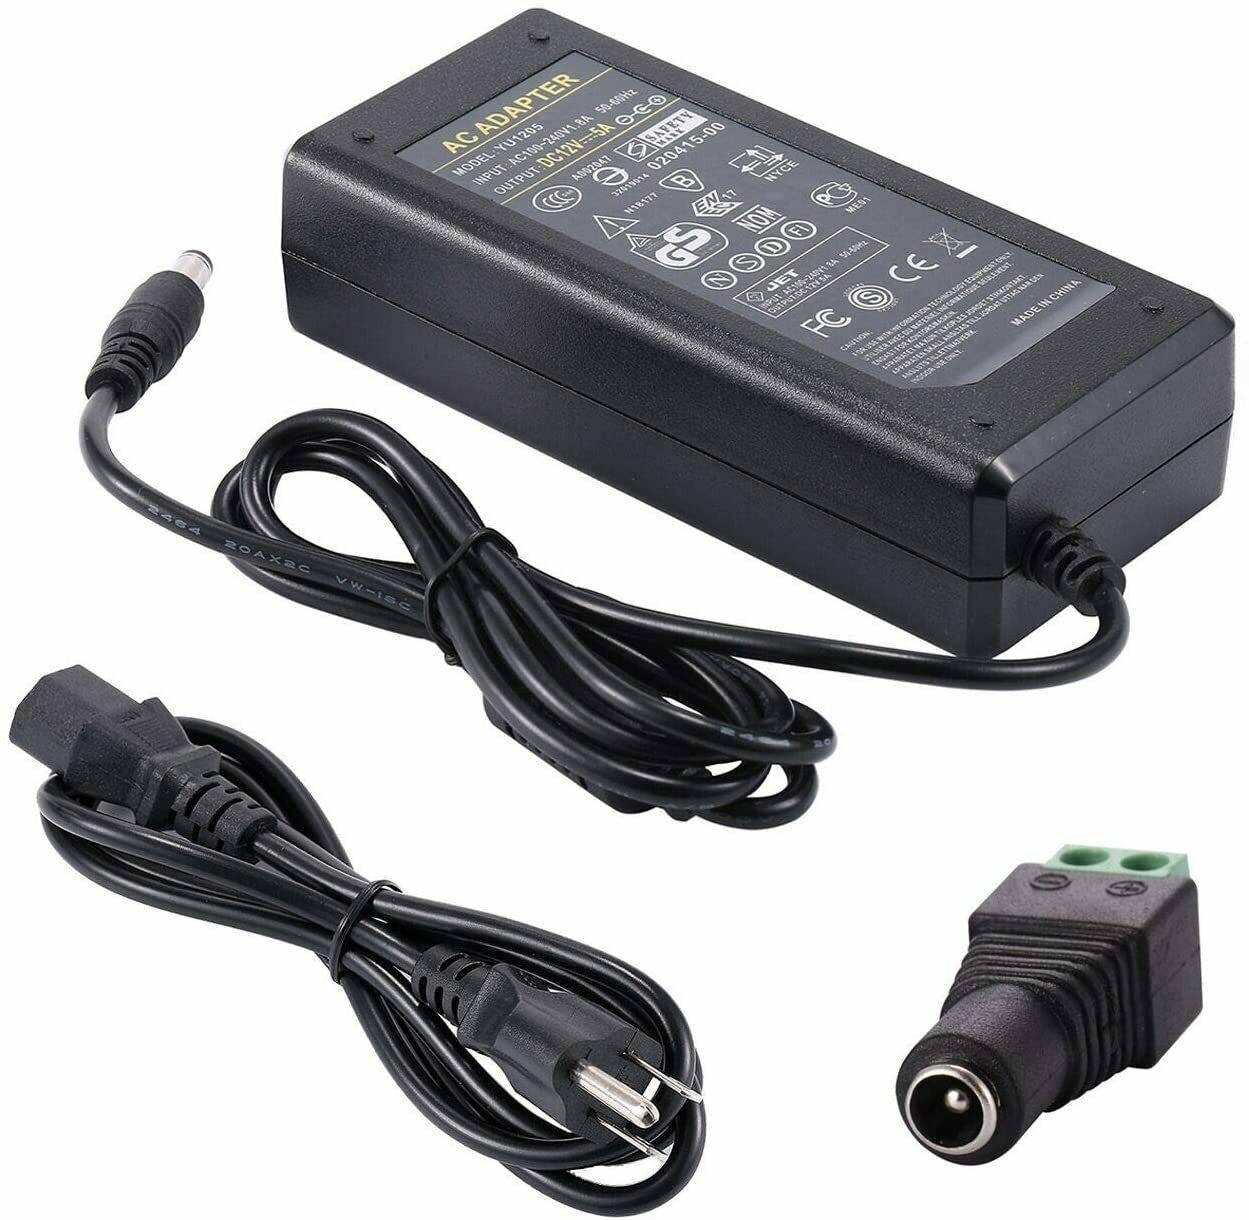 AC DC 12V 5A Power Supply Adapter Transformer Charger for LED Strip CCTV DVR Compatible Brand: Un